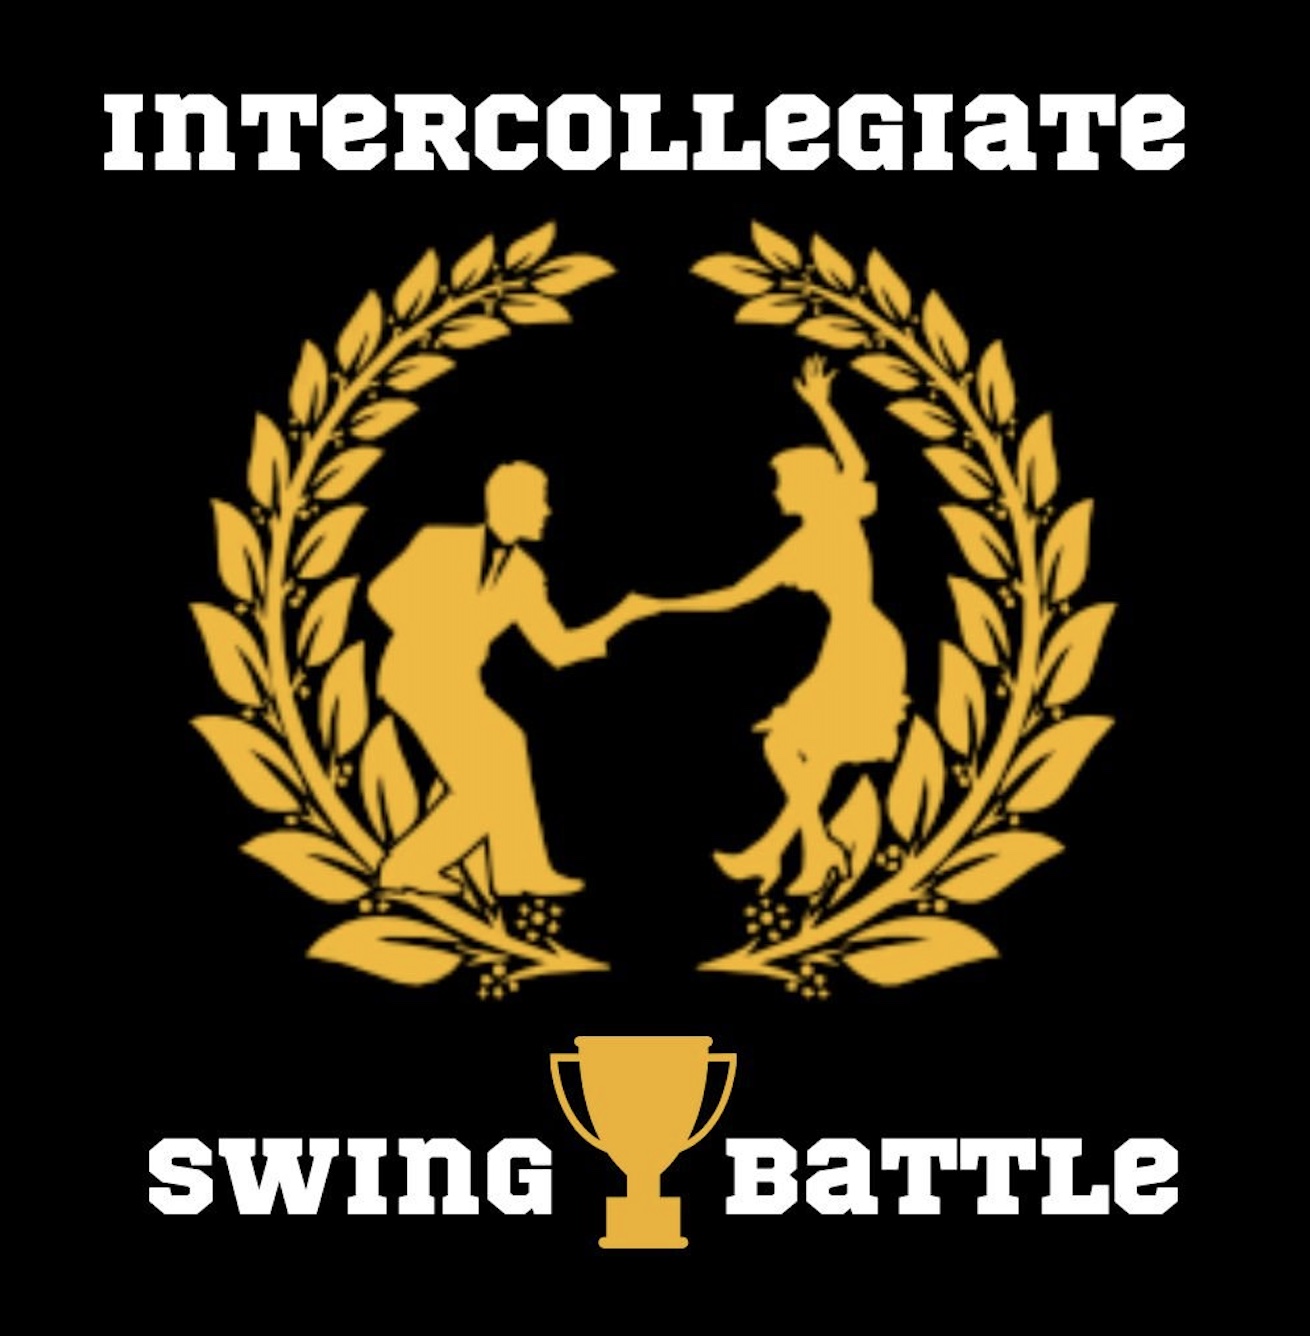 Denver Jazz Club Youth All-Stars and the Hot Tomatoes Dance Orchestra to Perform on Saturday, April 22nd, at the Intercollegiate Swing Dance Battle